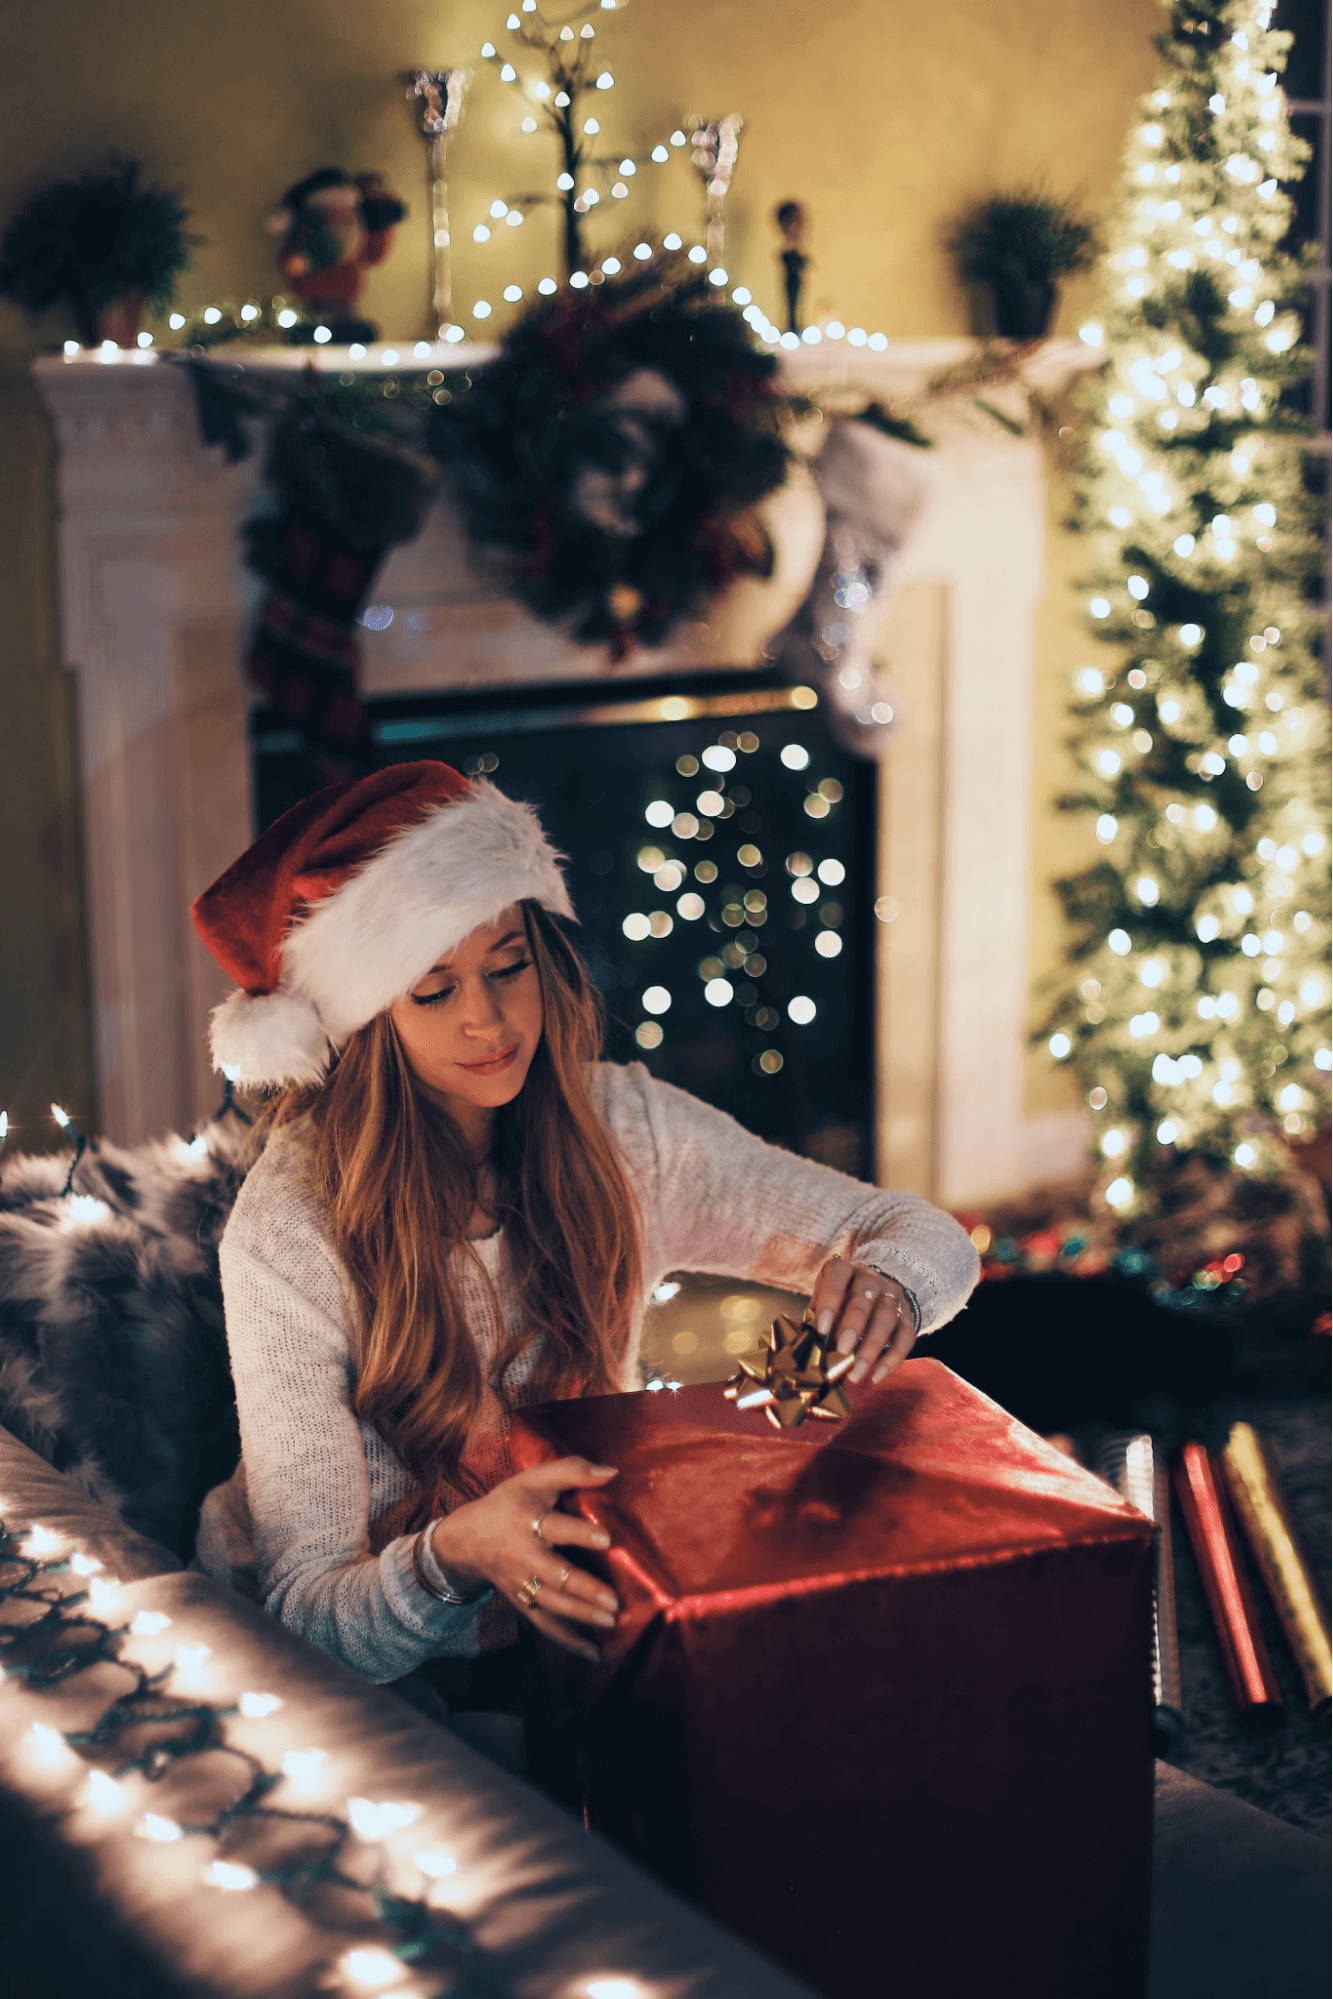 Woman opening a gift on Christmas Eve